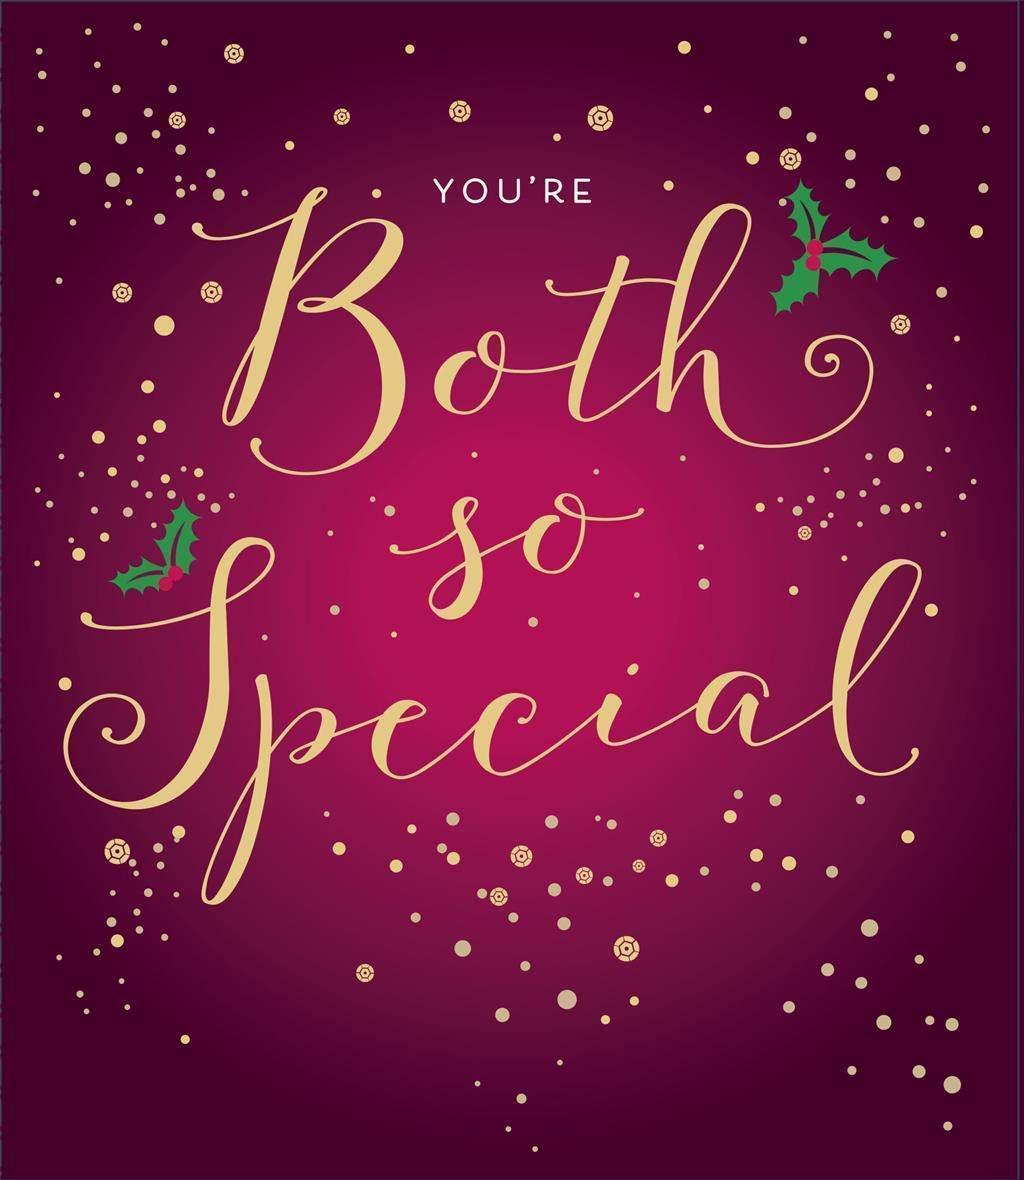 You're Both So Special Christmas Card 